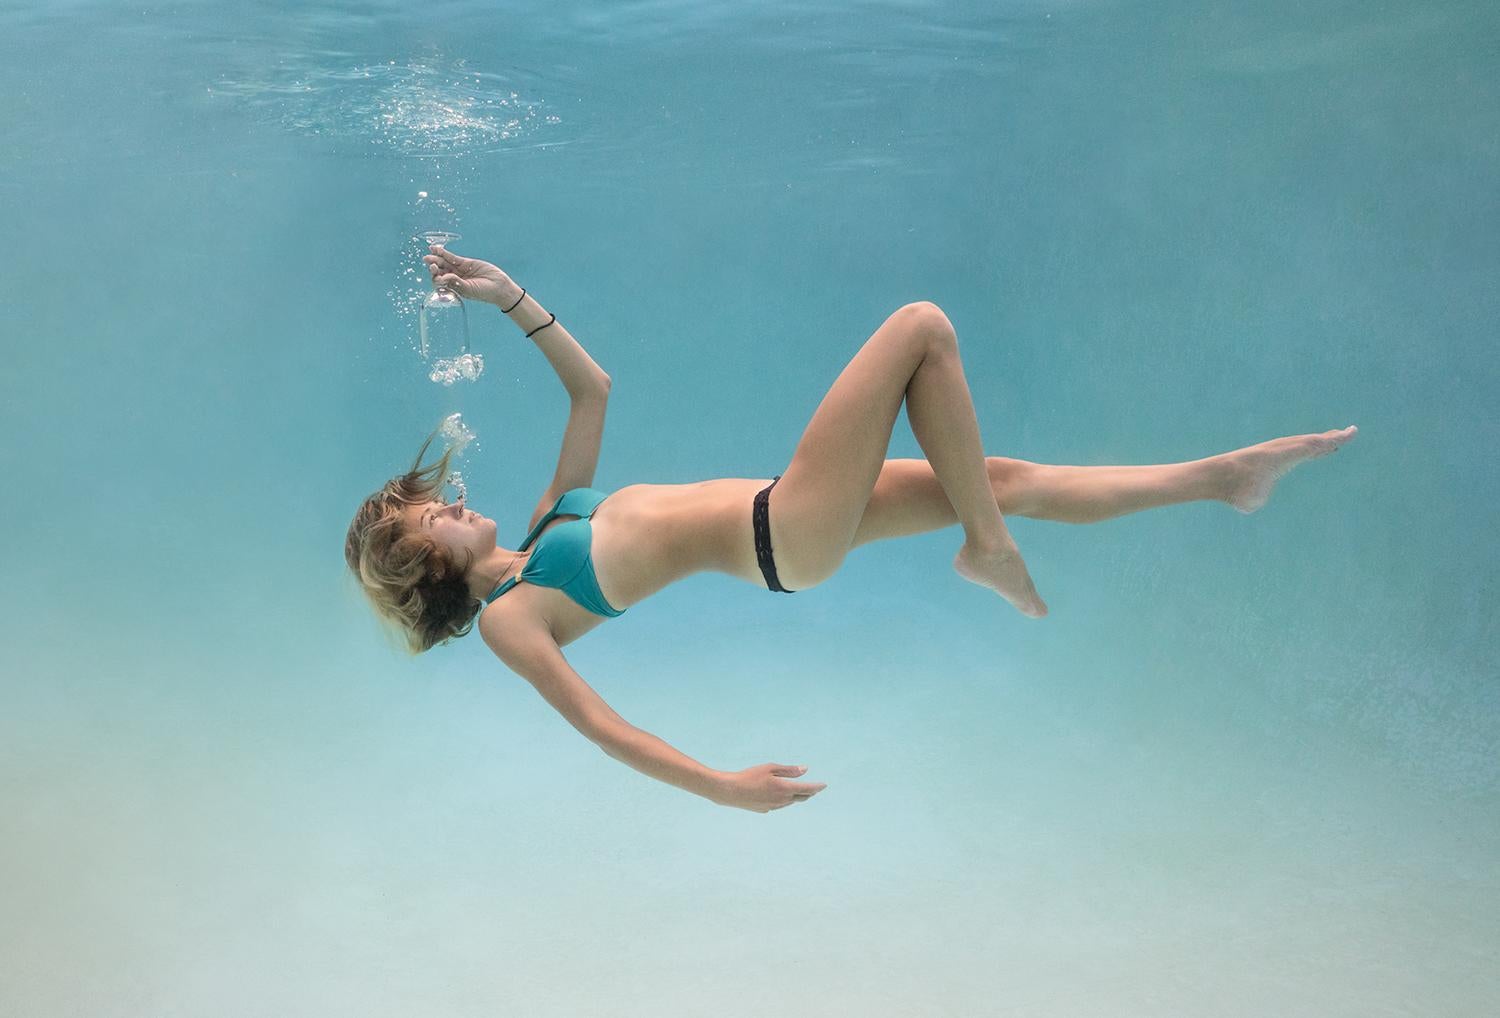 Alex Sher Color Photograph - Drinking Air - underwater photograph - archival pigment print 24x36"